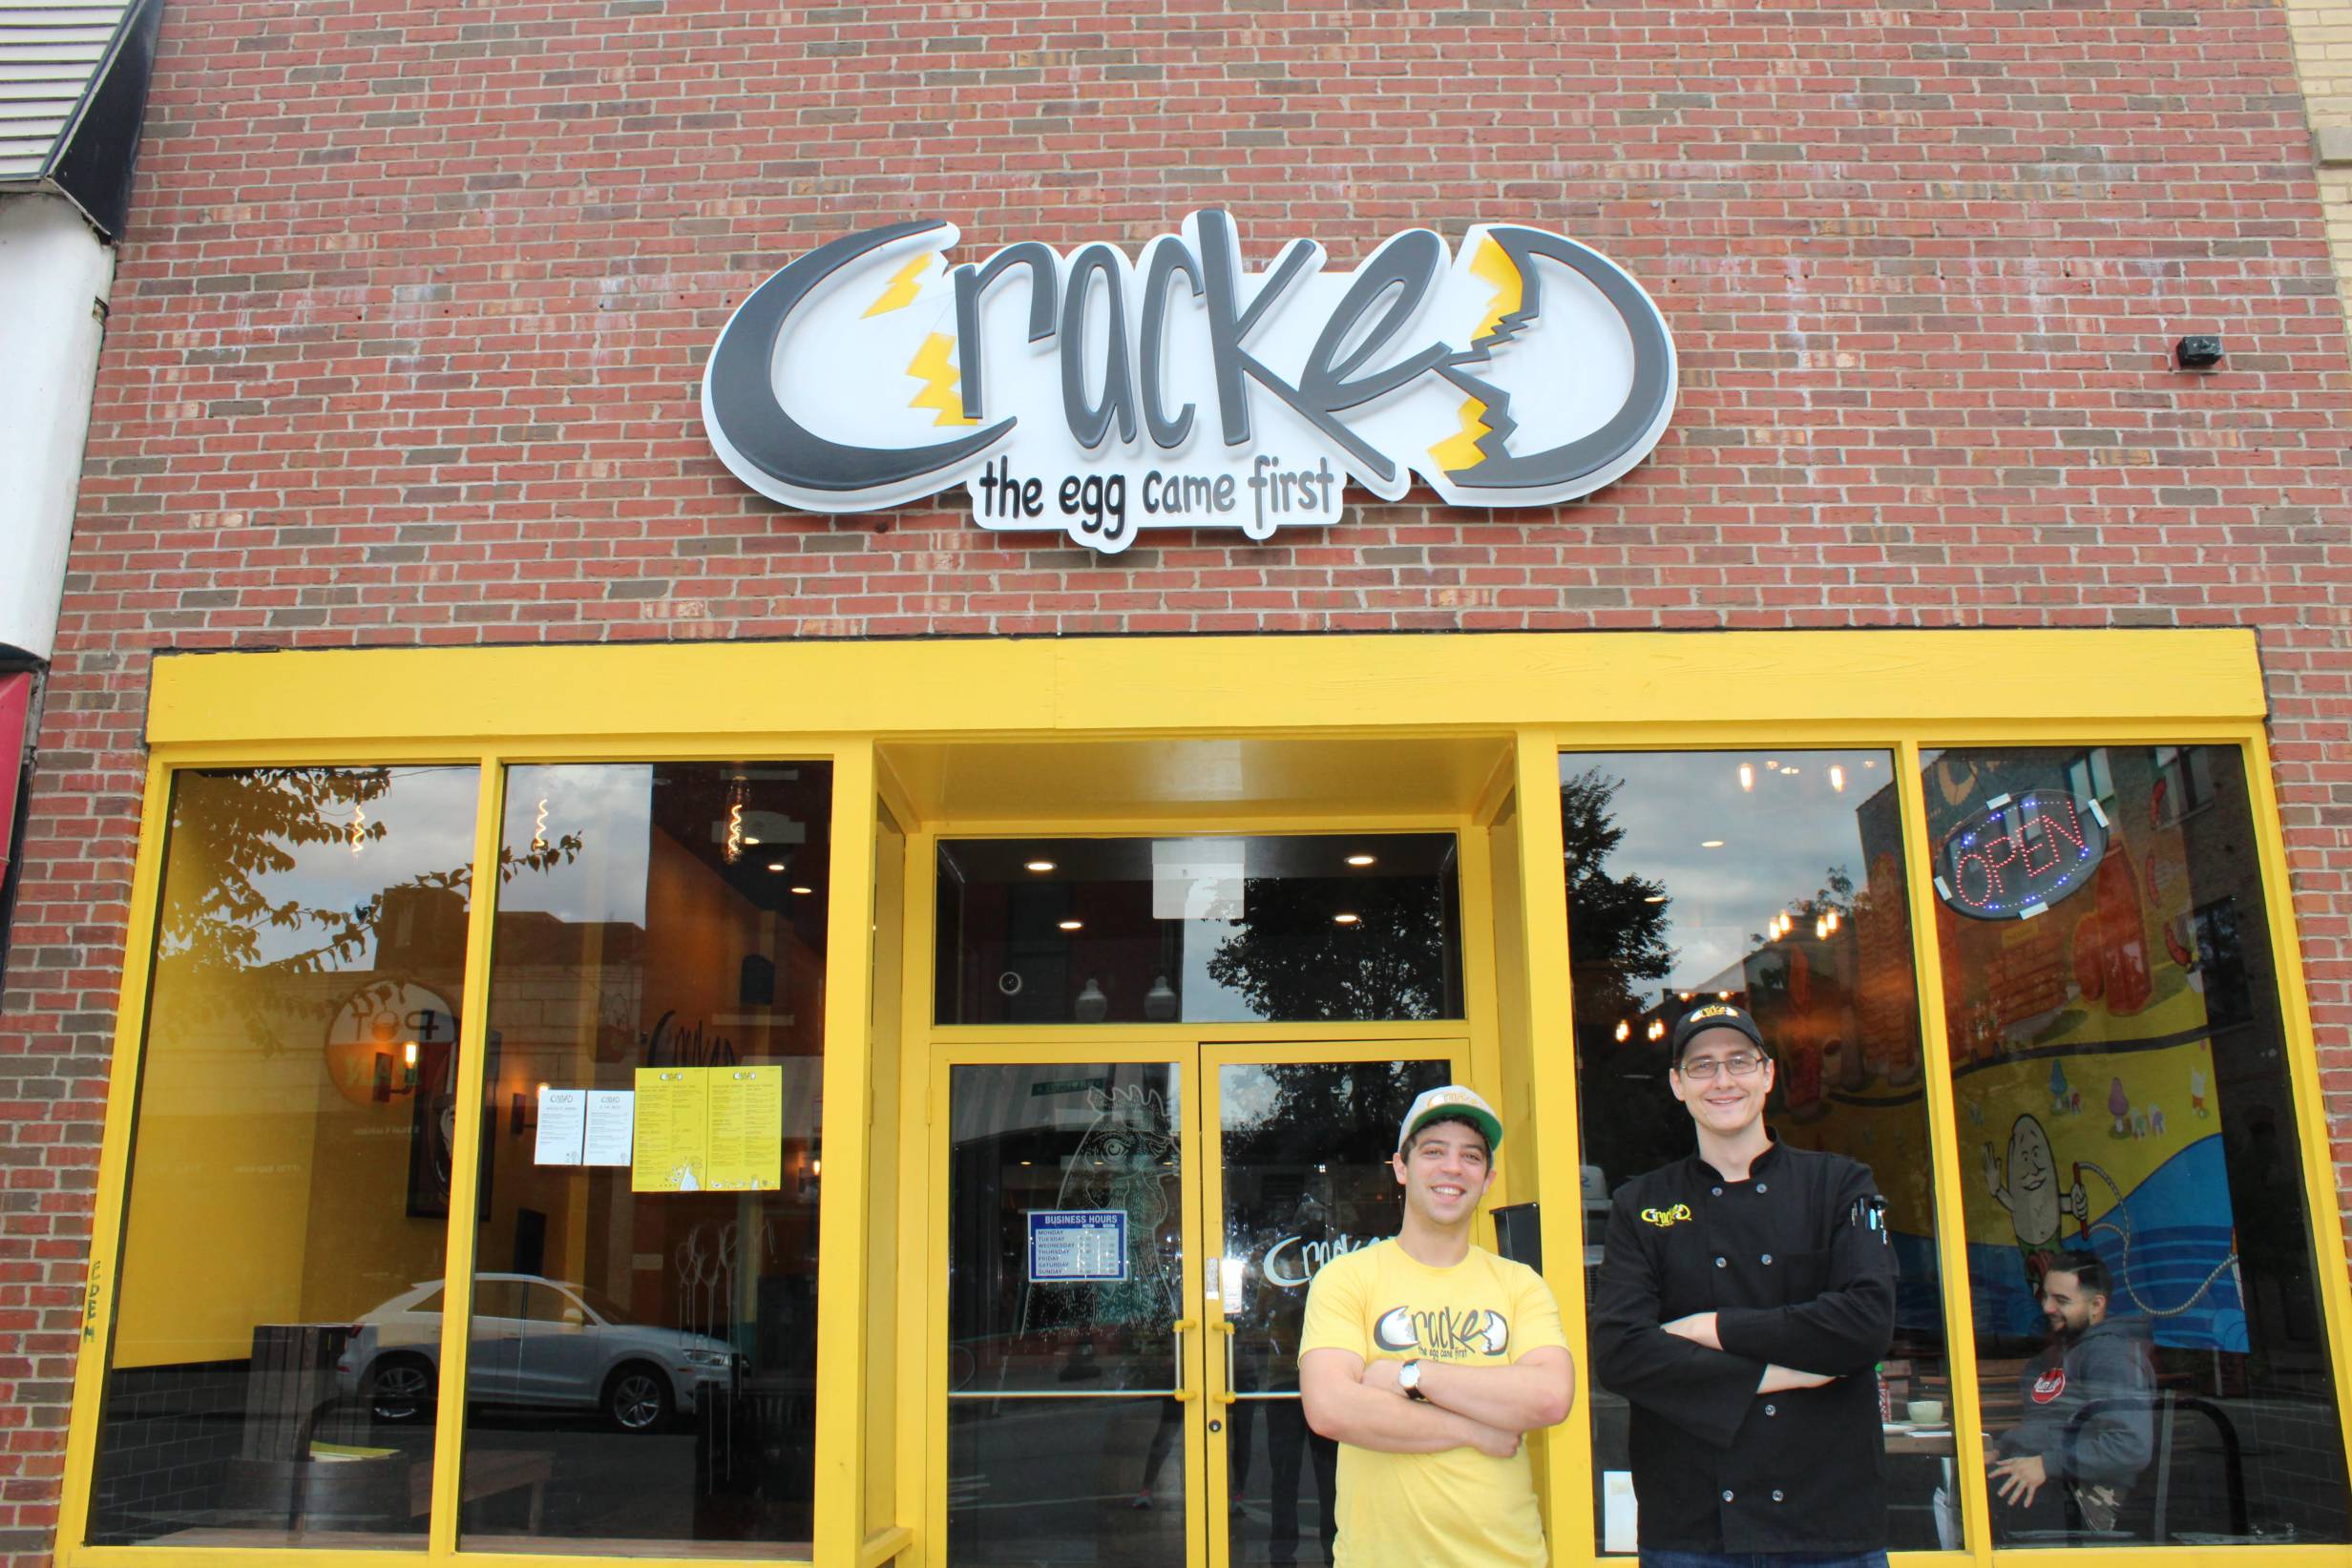 The owners, Daniel Krause and Elliott West, pose in front of Cracked's Green Street location. Photo provided by Cracked.